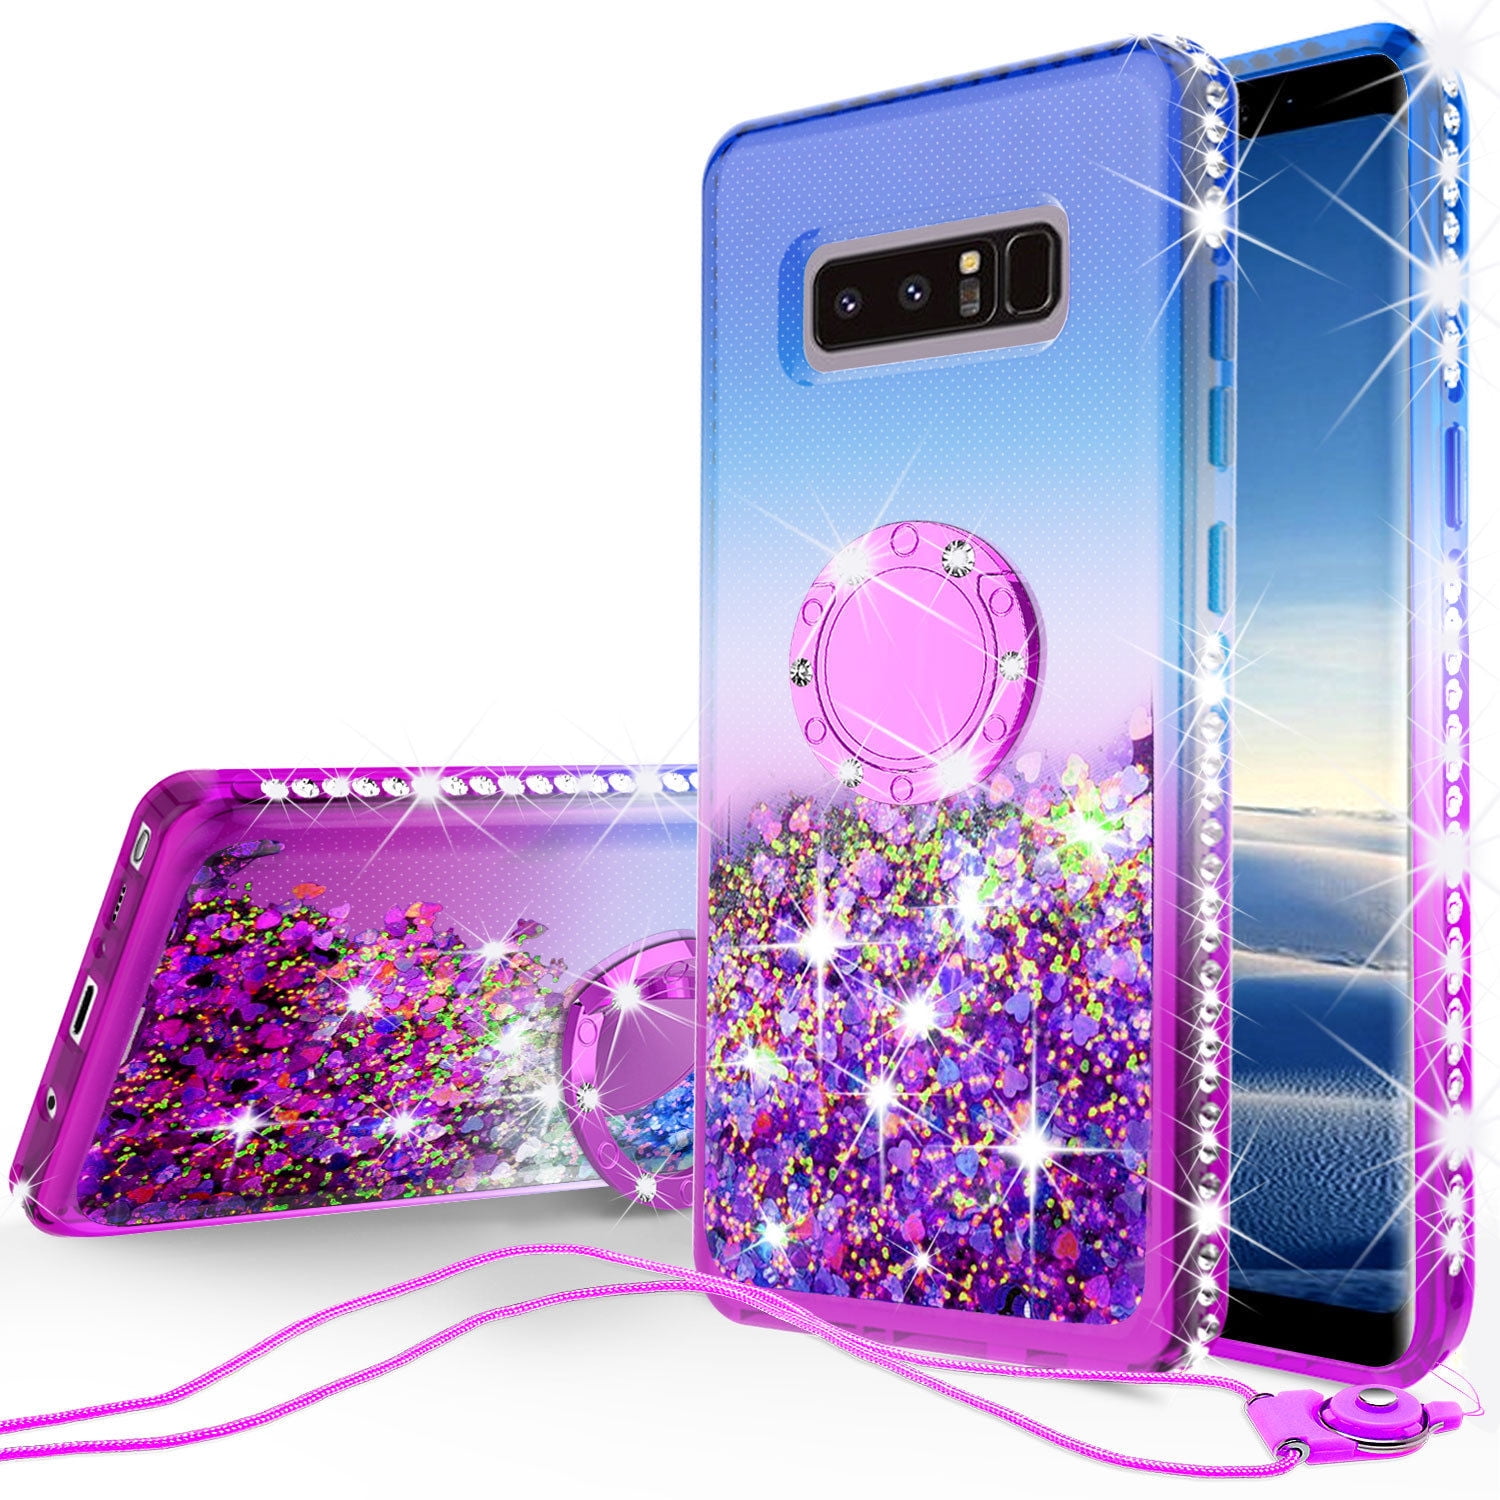 Bling Sparkle Plating Bumper Design Soft Slim TPU Silicone Gel Rubber Case Ultra Thin Shockproof Full Protective Cover,Red JAWSEU Case Glitter Compatible with Samsung Galaxy S9 